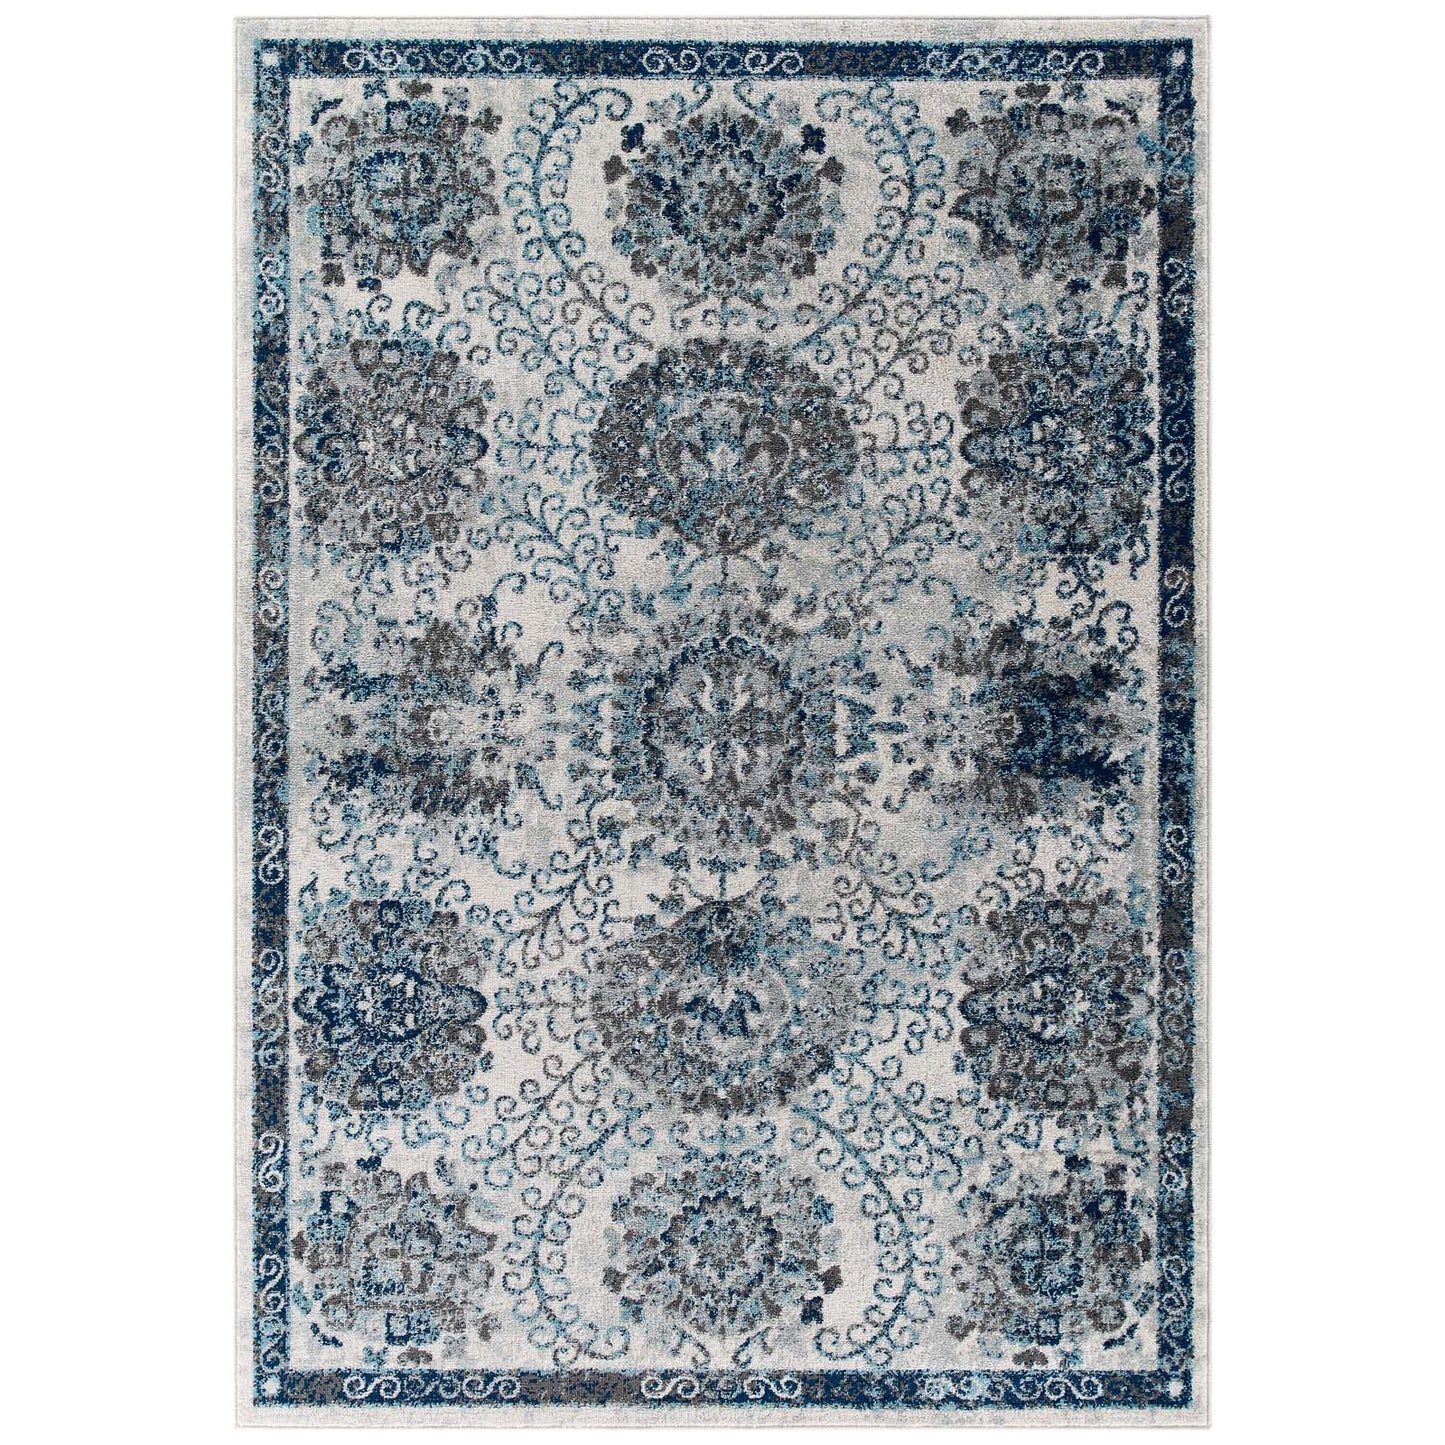 Entourage Kensie Distressed Floral Moroccan Trellis  8x10 Area Rug Ivory and Blue R-1173B-810